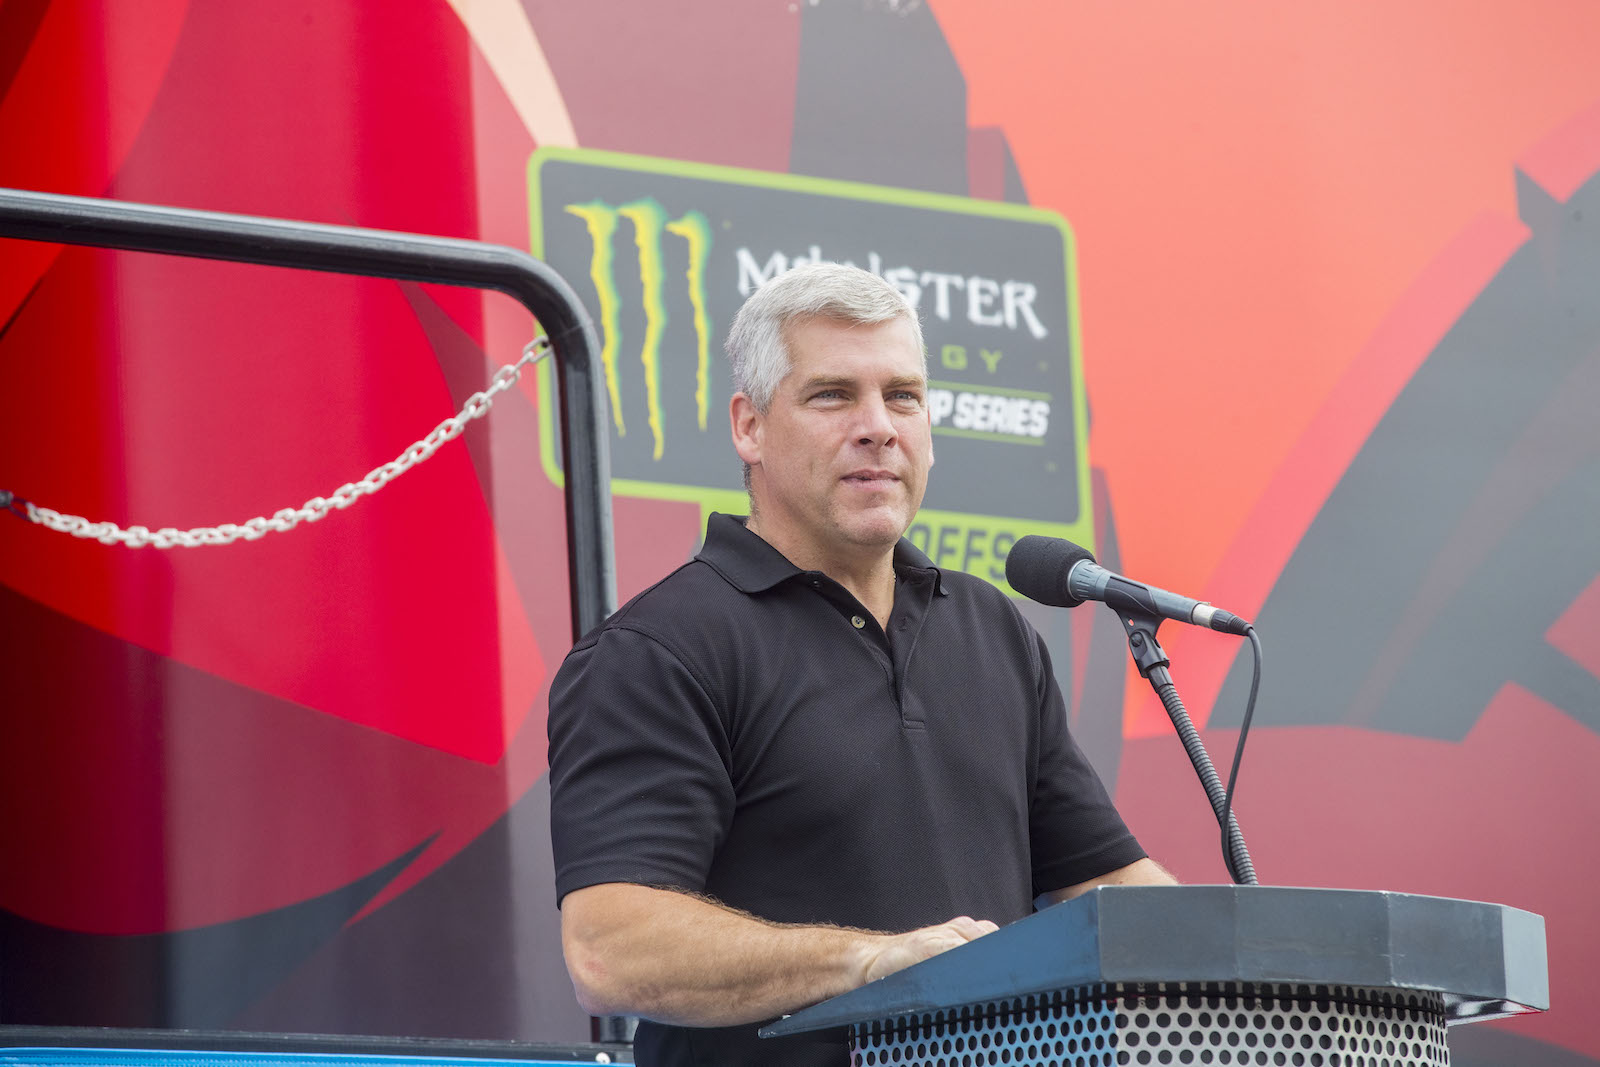 a man with white hair and a black polo shirt stands in front of a podium with a speaker